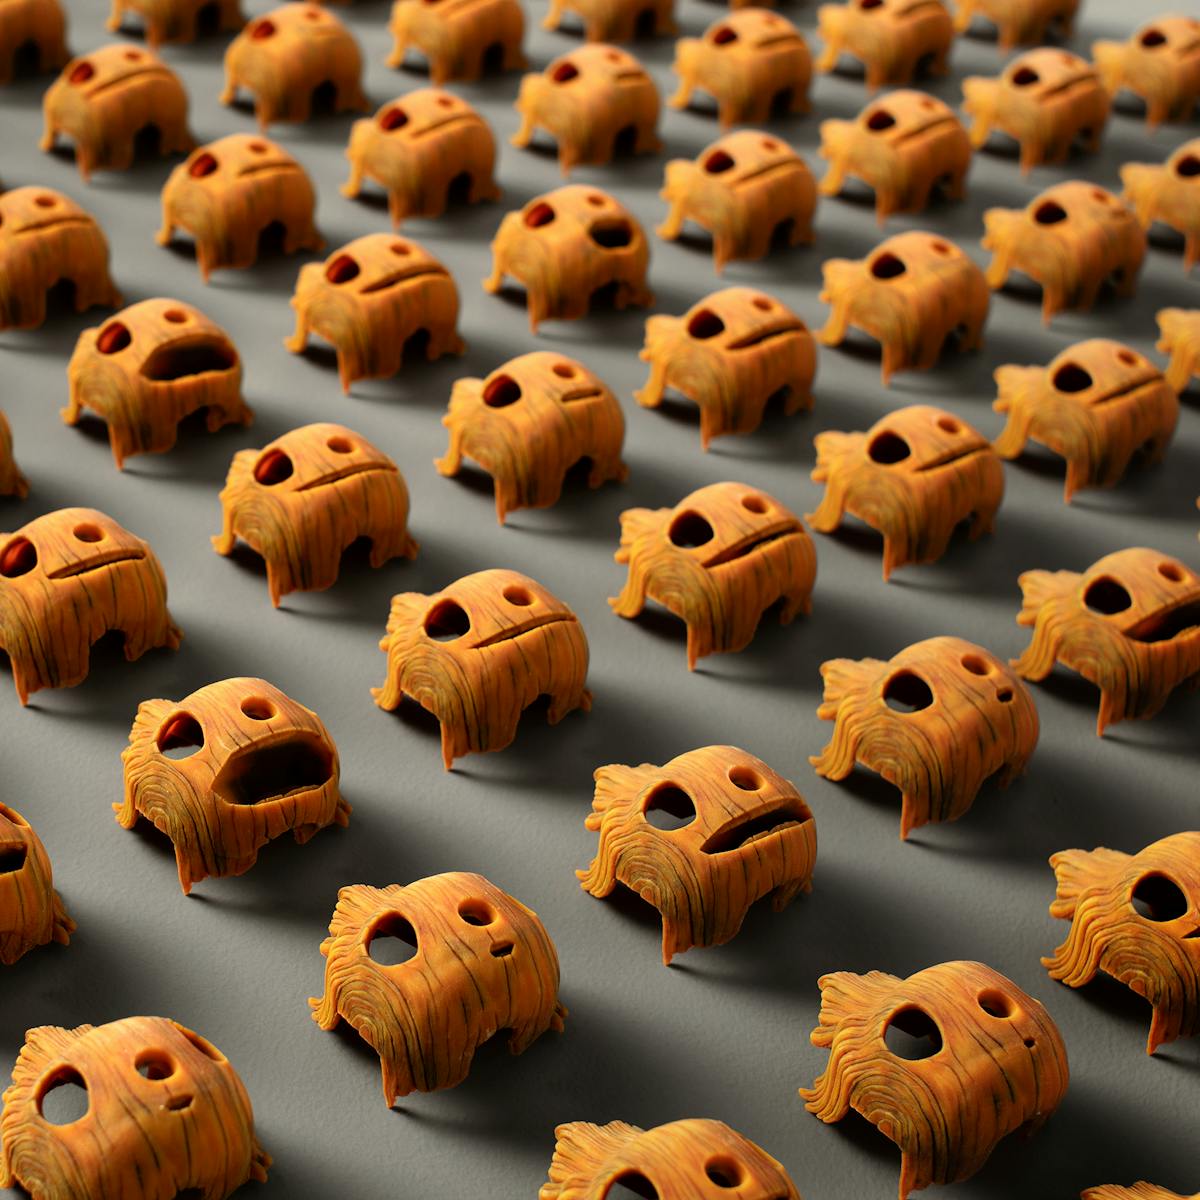 A grid of Pinocchio's many wooden faces, in a myriad of expressions.